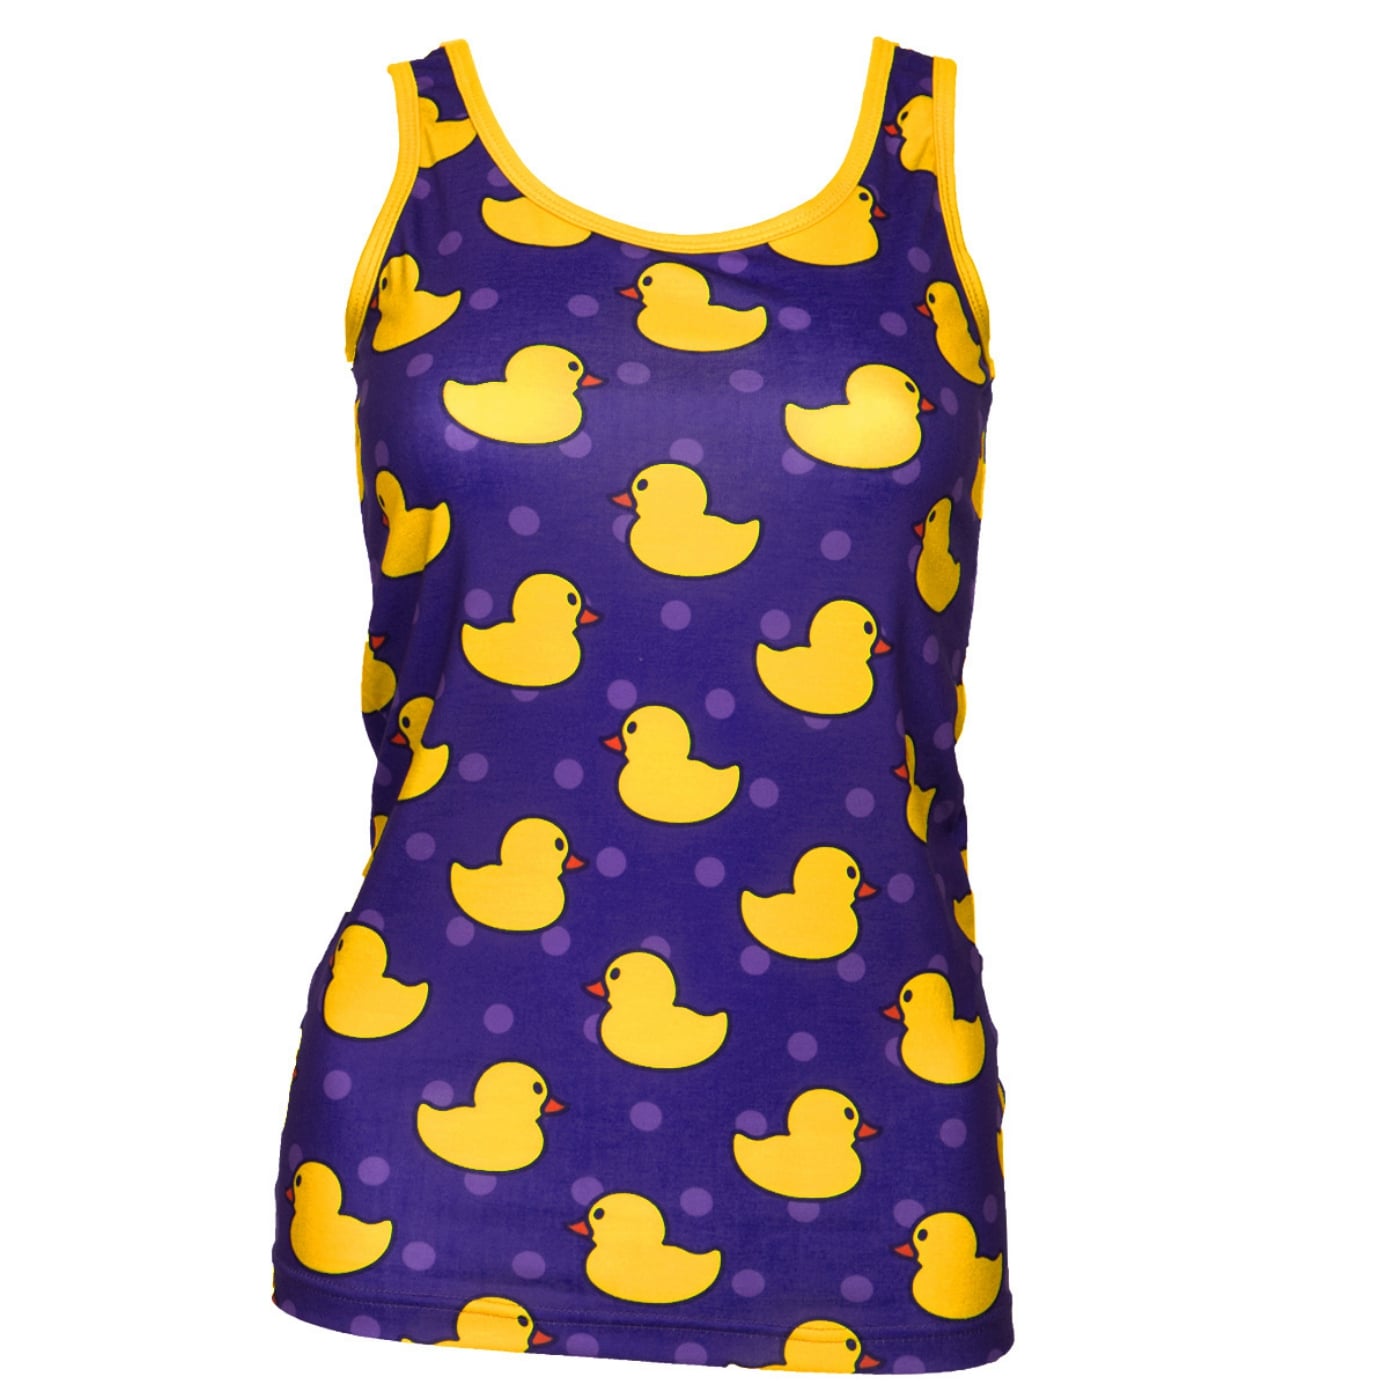 Yellow Ducky Singlet Top by RainbowsAndFairies.com.au (Yellow Duck - Rubber Duck - Rubber Ducky - Vintage Inspired - Kitsch - Tank Top) - SKU: CL_SGLET_DUCKY_YEL - Pic-01